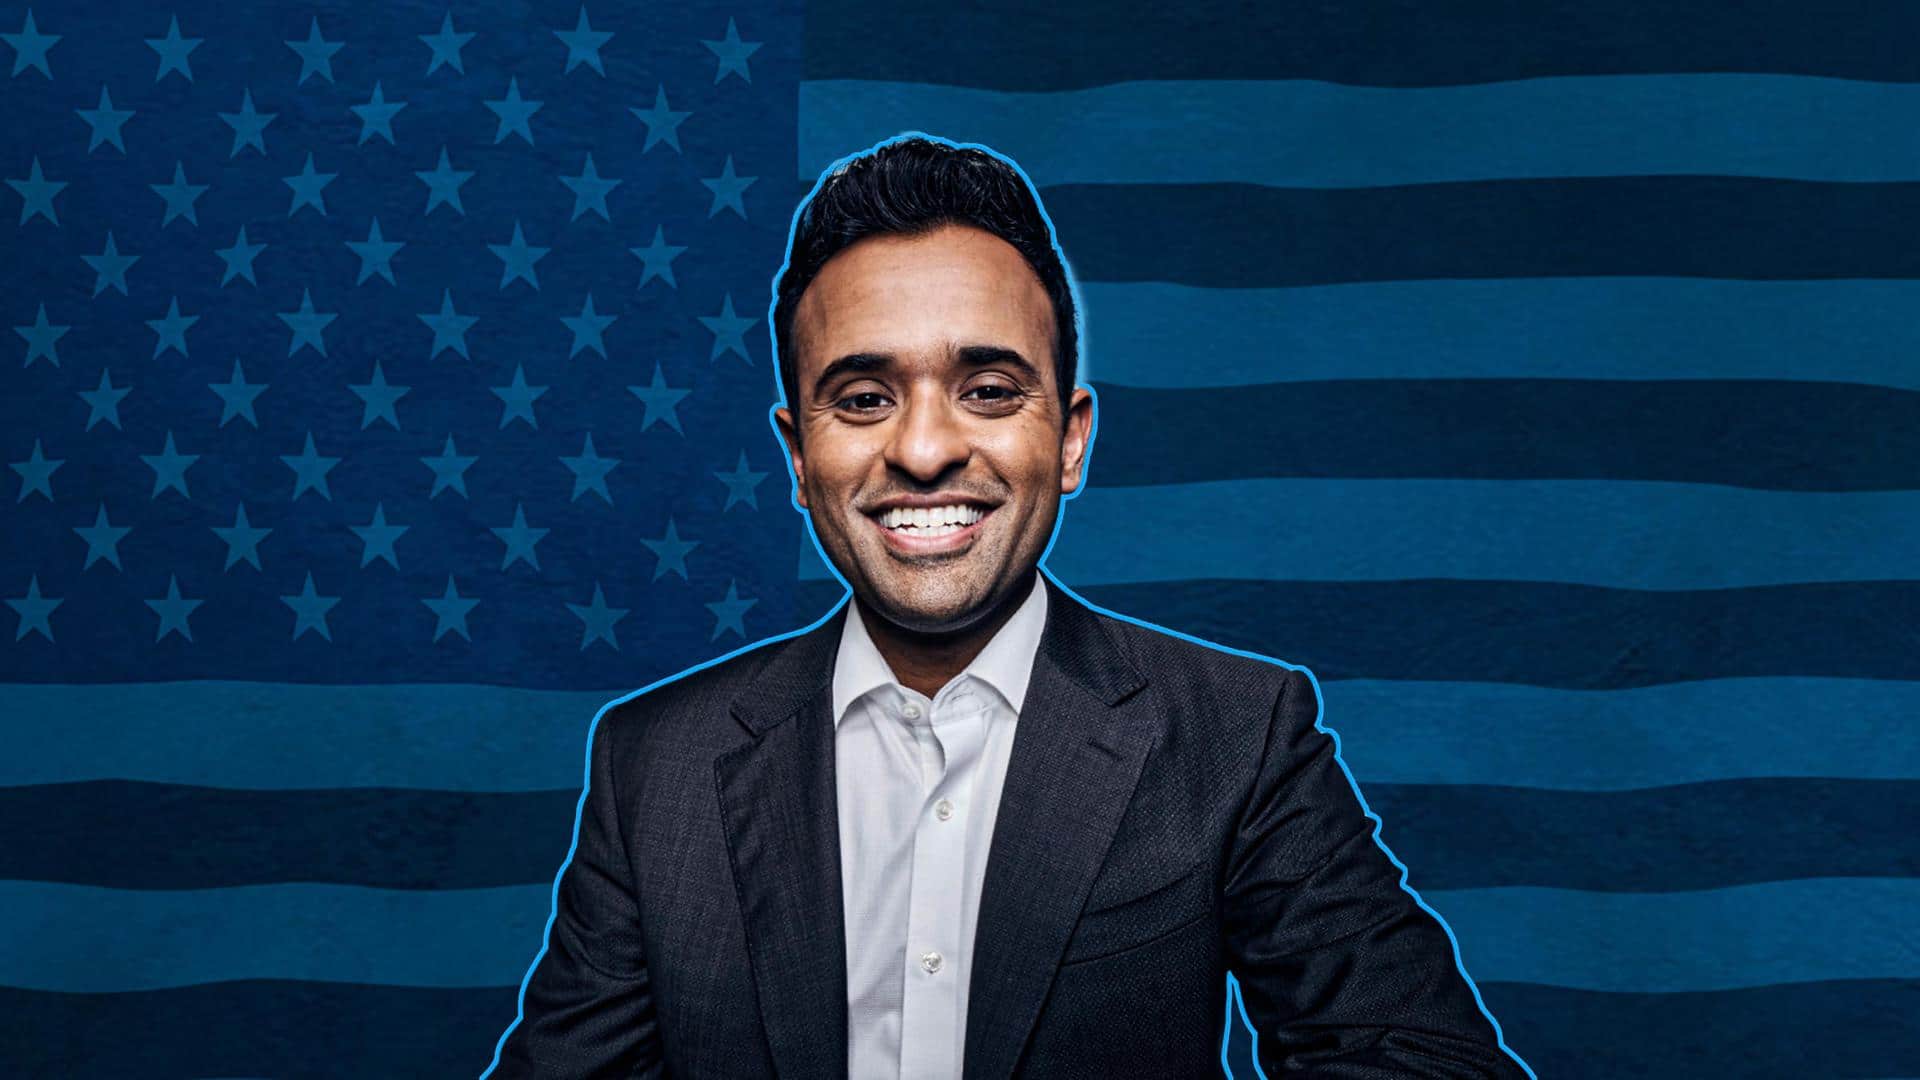 Indian-origin Vivek Ramaswamy announces candidacy for 2024 US presidential election